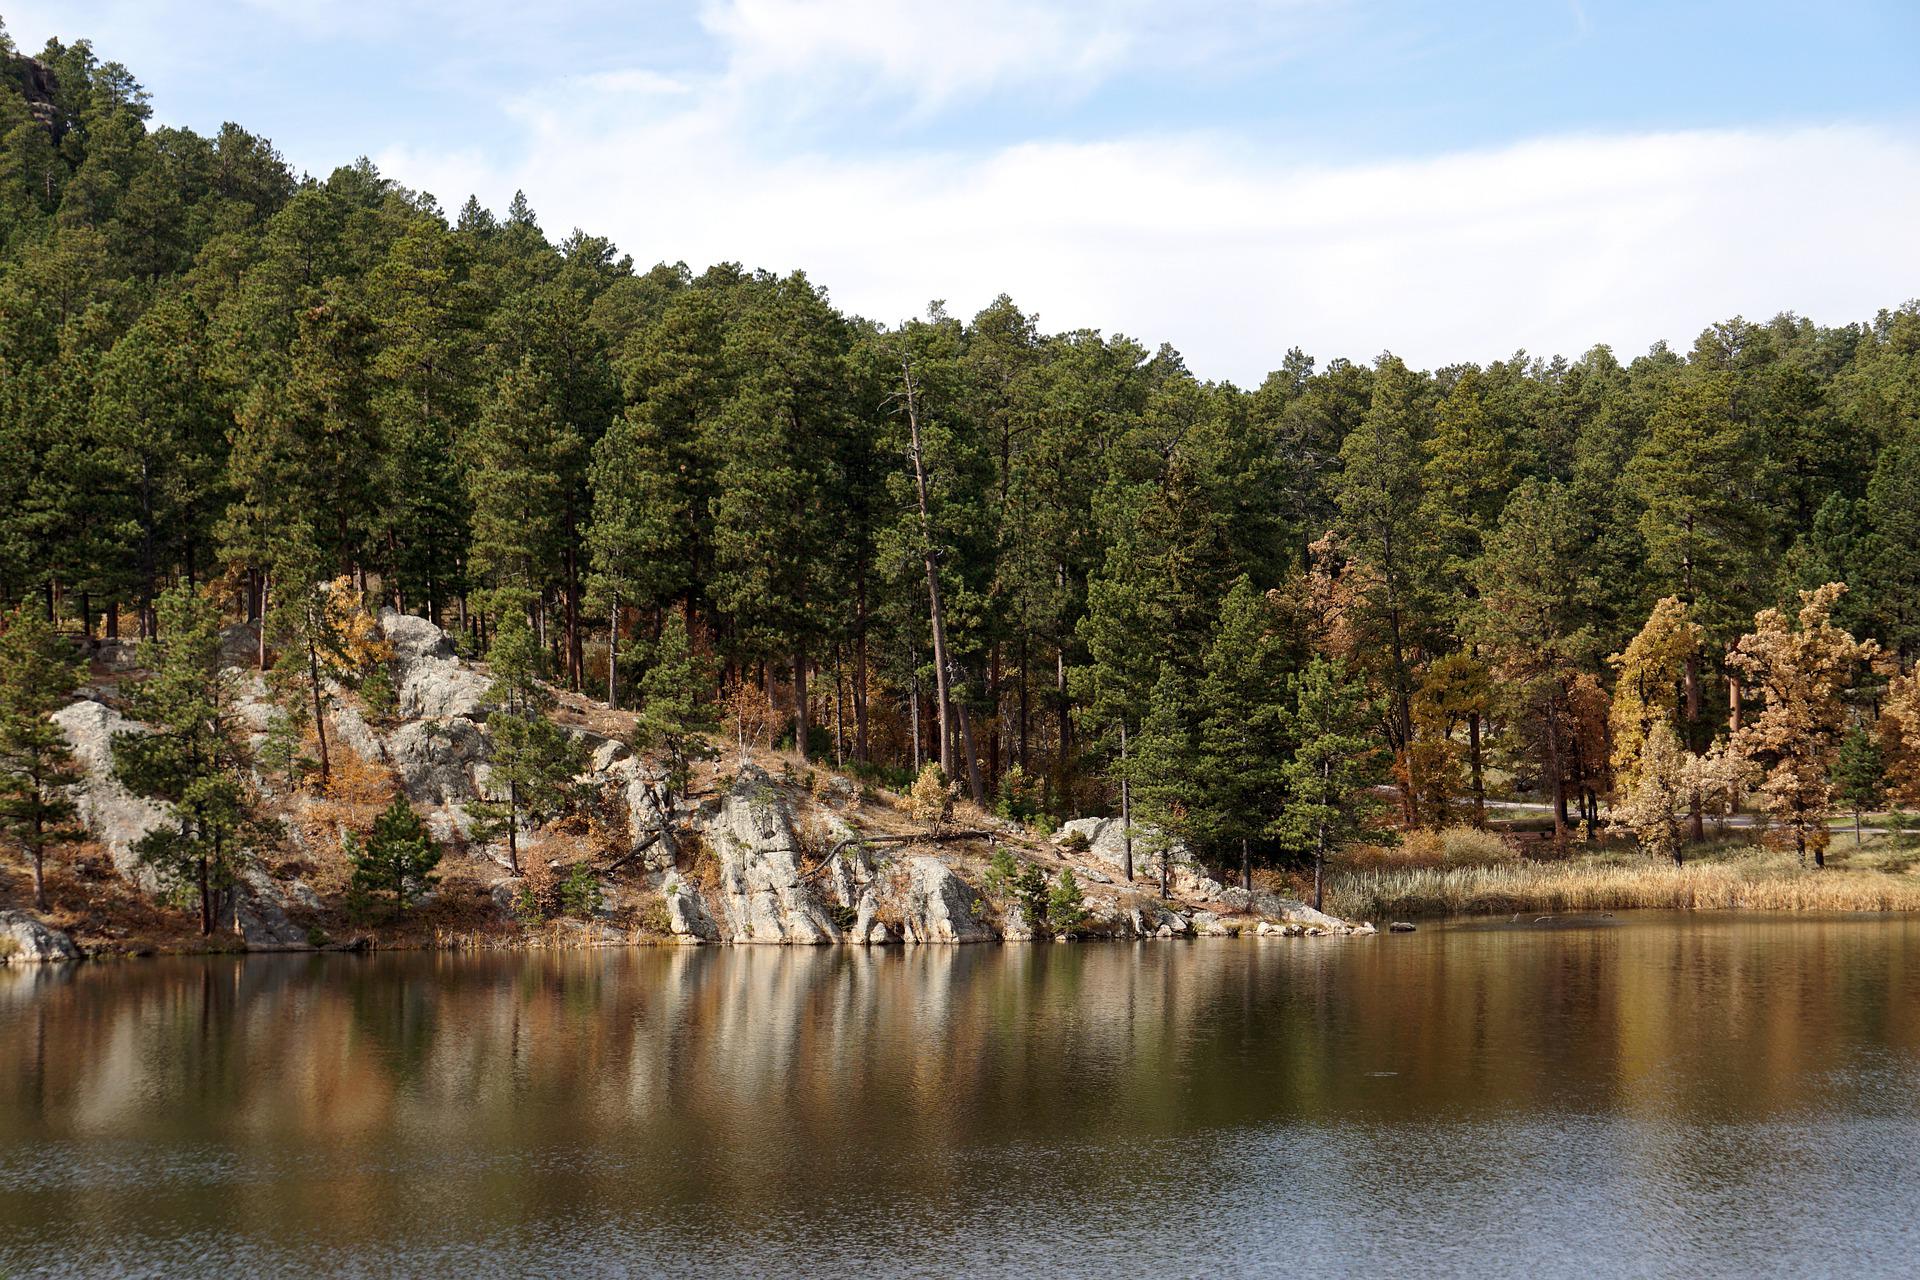 Lake with rock outcrop and forest in the background.